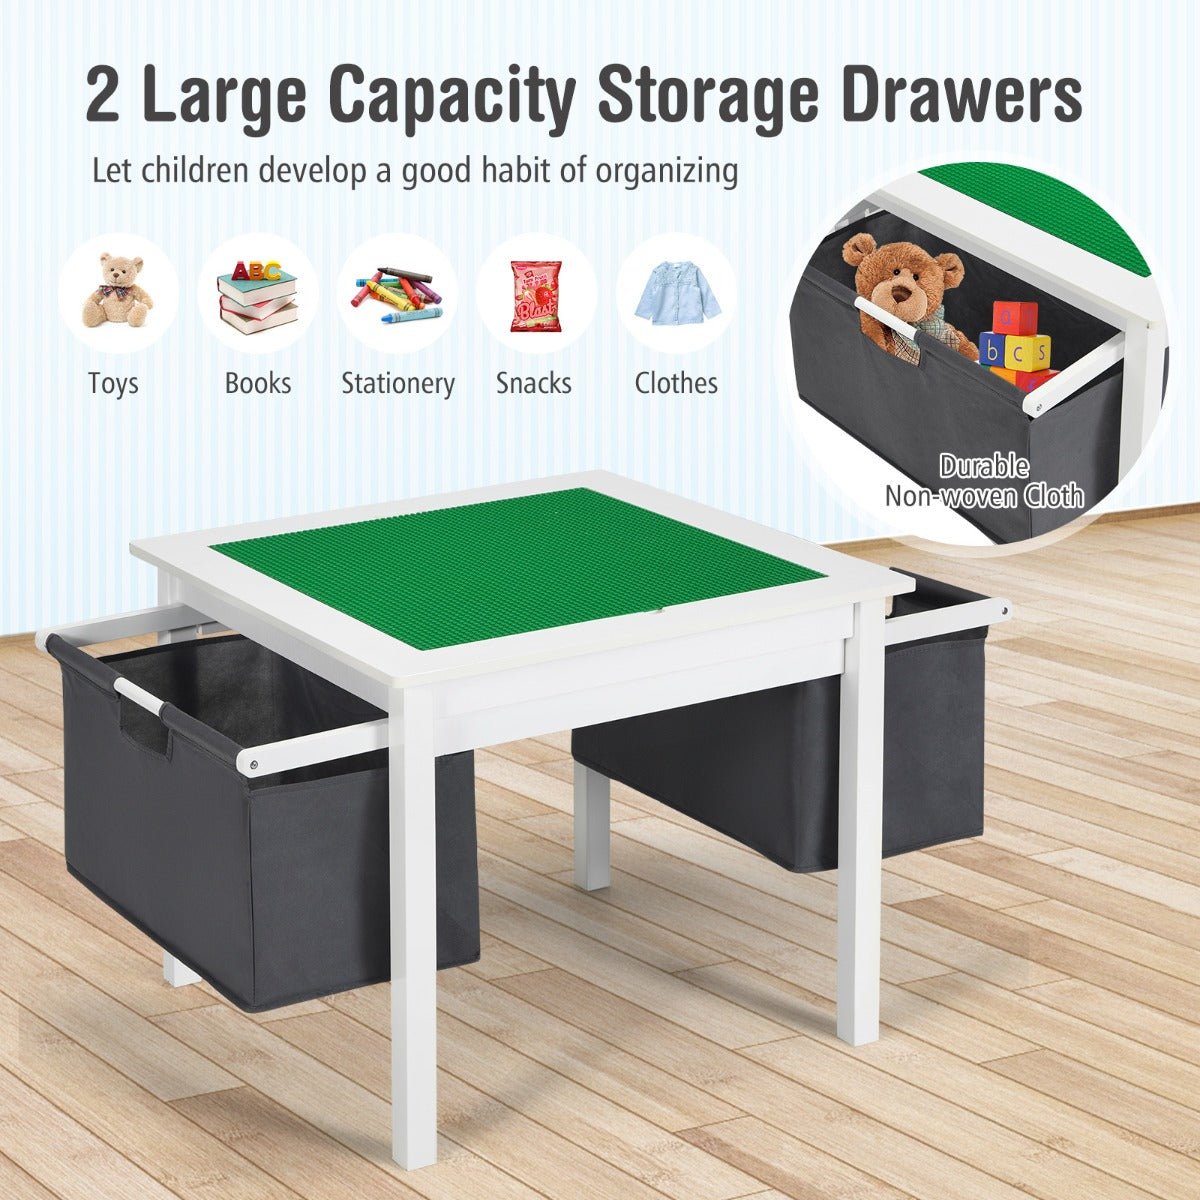 Enhance Playtime with the White Kids Activity Table - Buy Now!